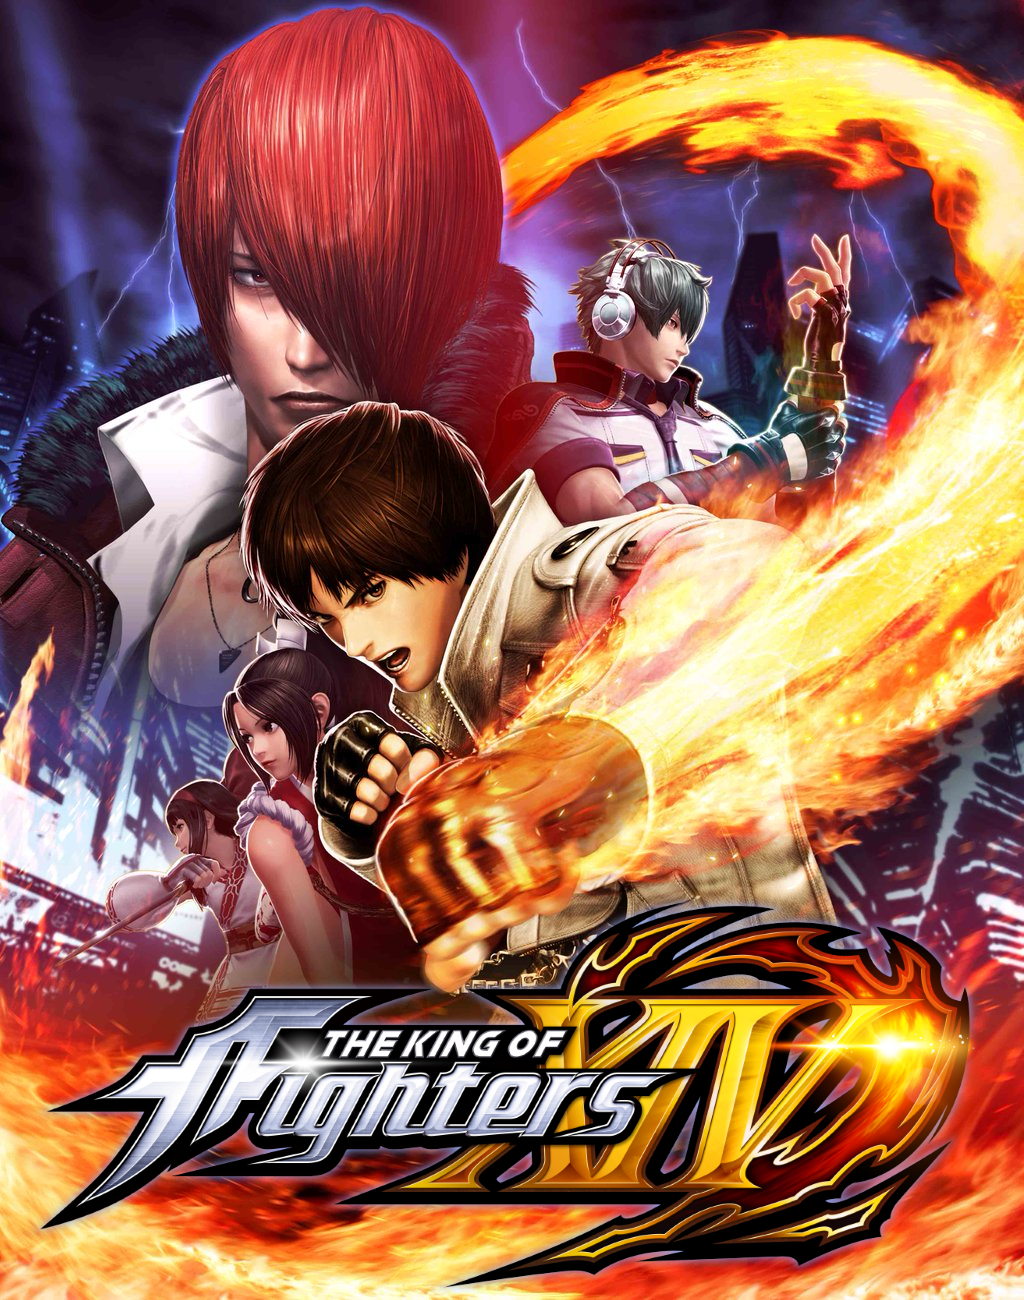 The King Of Fighters XIV wallpaper, Video Game, HQ The King Of Fighters XIV pictureK Wallpaper 2019